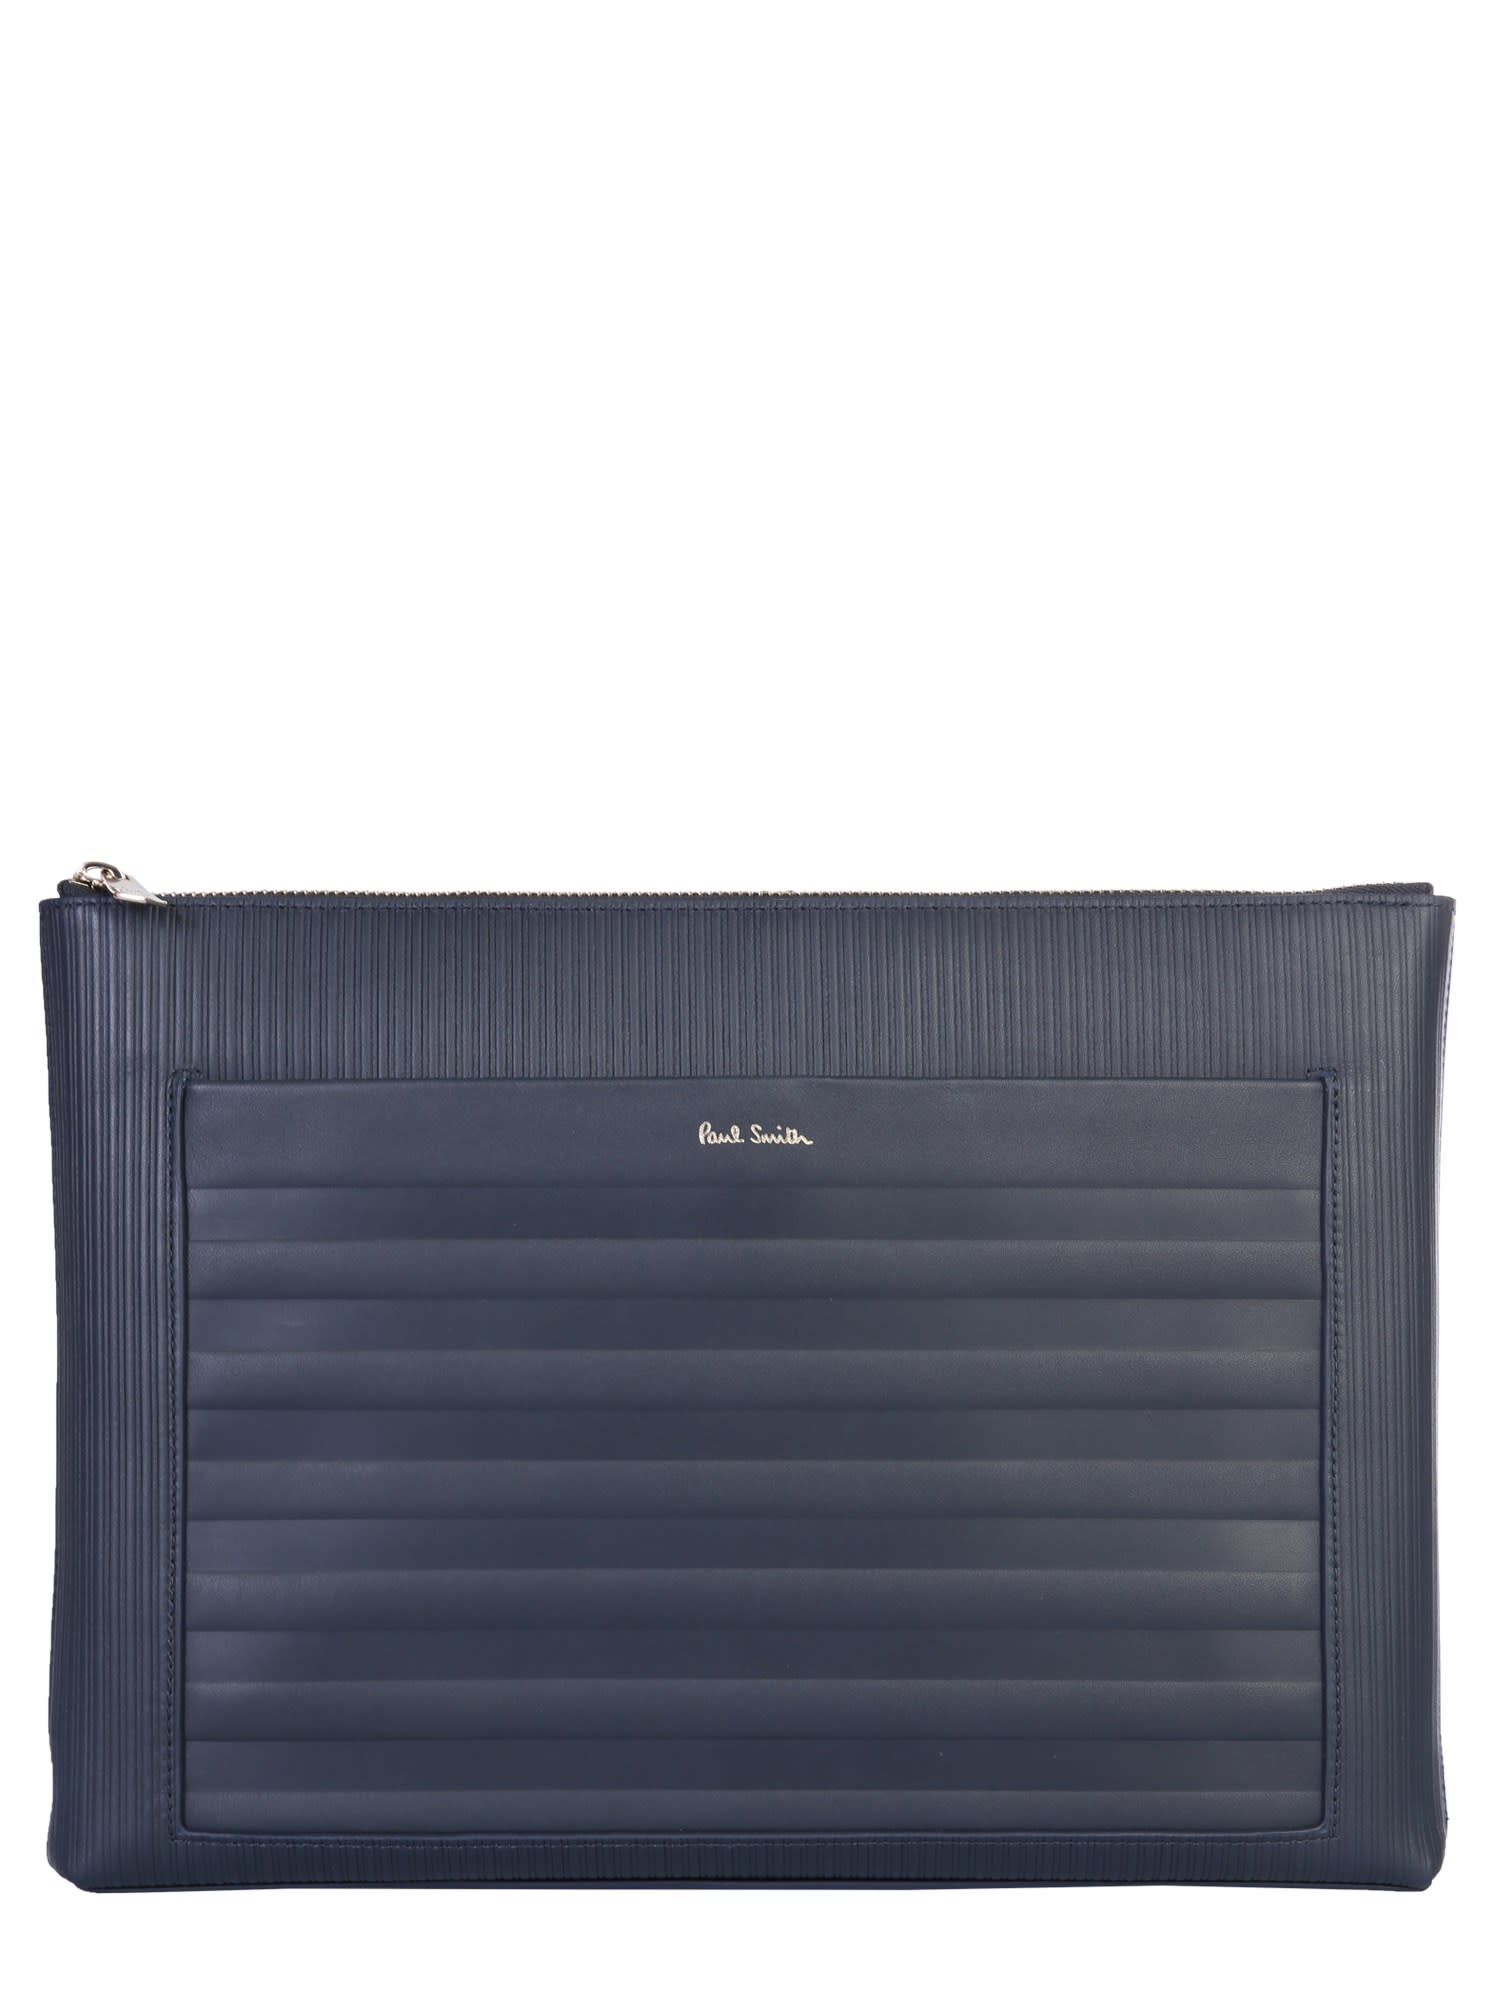 PAUL SMITH DOCUMENT HOLDER WITH LOGO,11294226